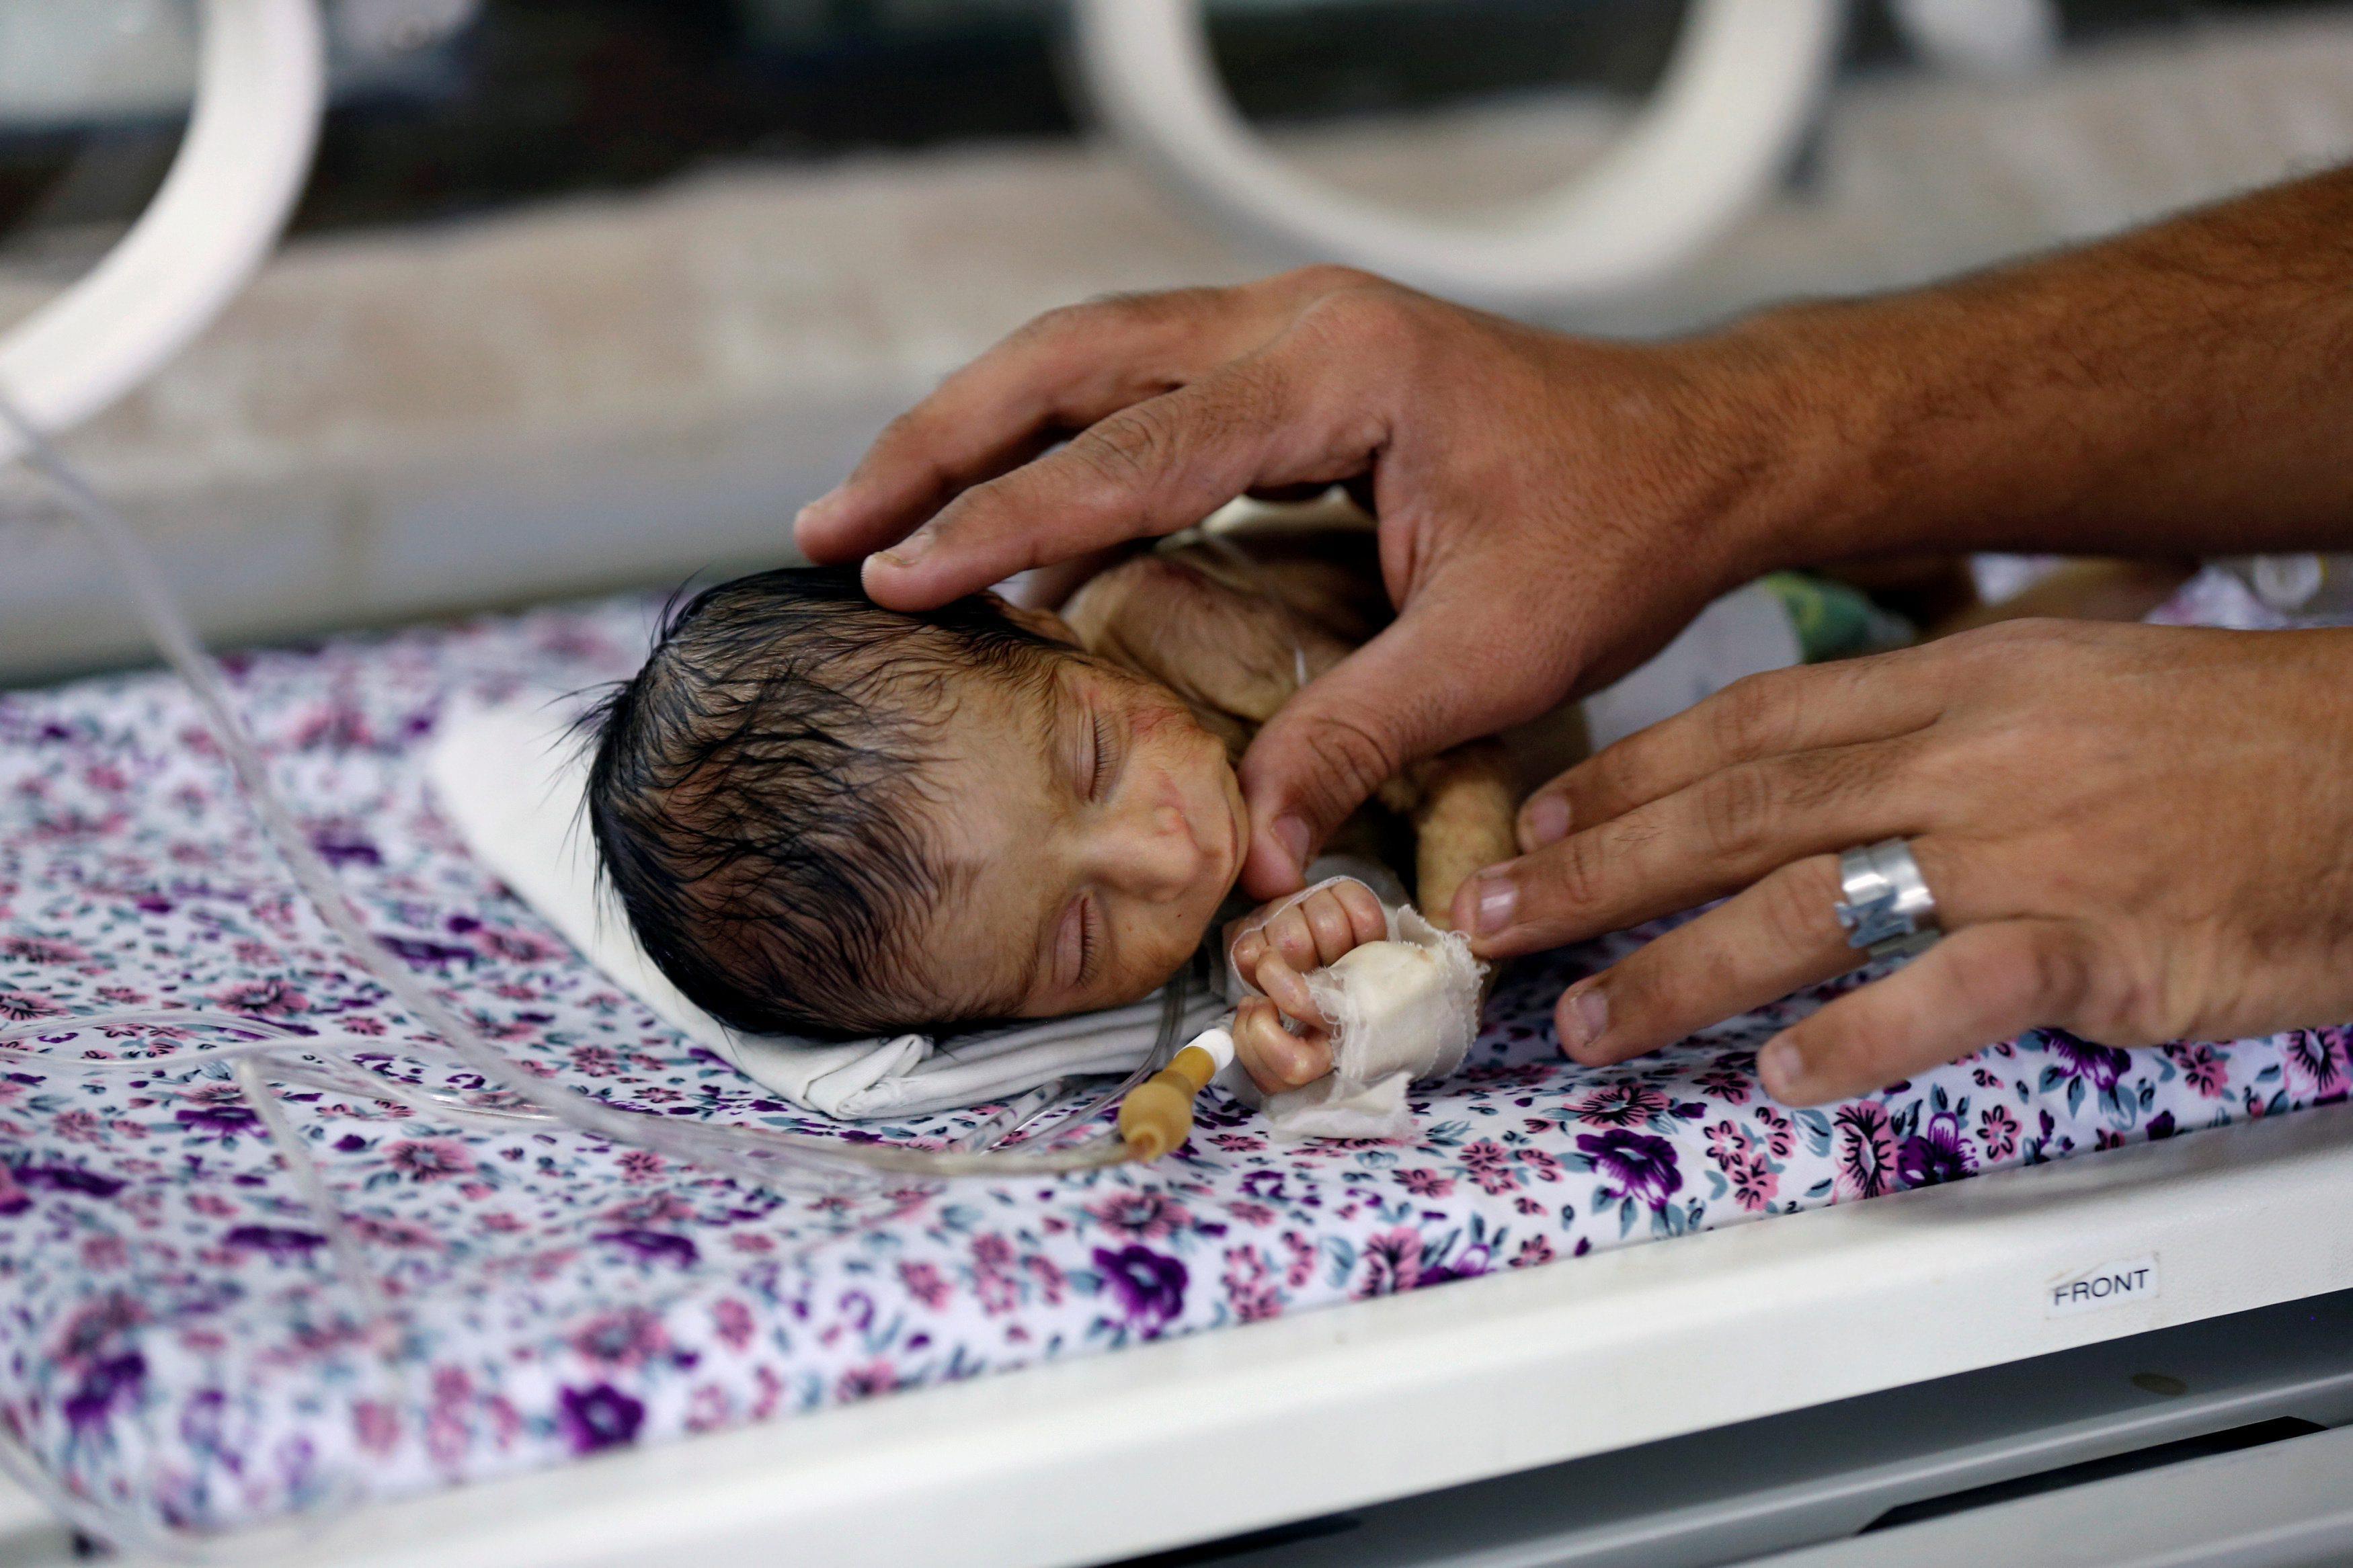 Nurse checks a premature baby in an incubator at the child care unit of a hospital in Sanaa, Yemen